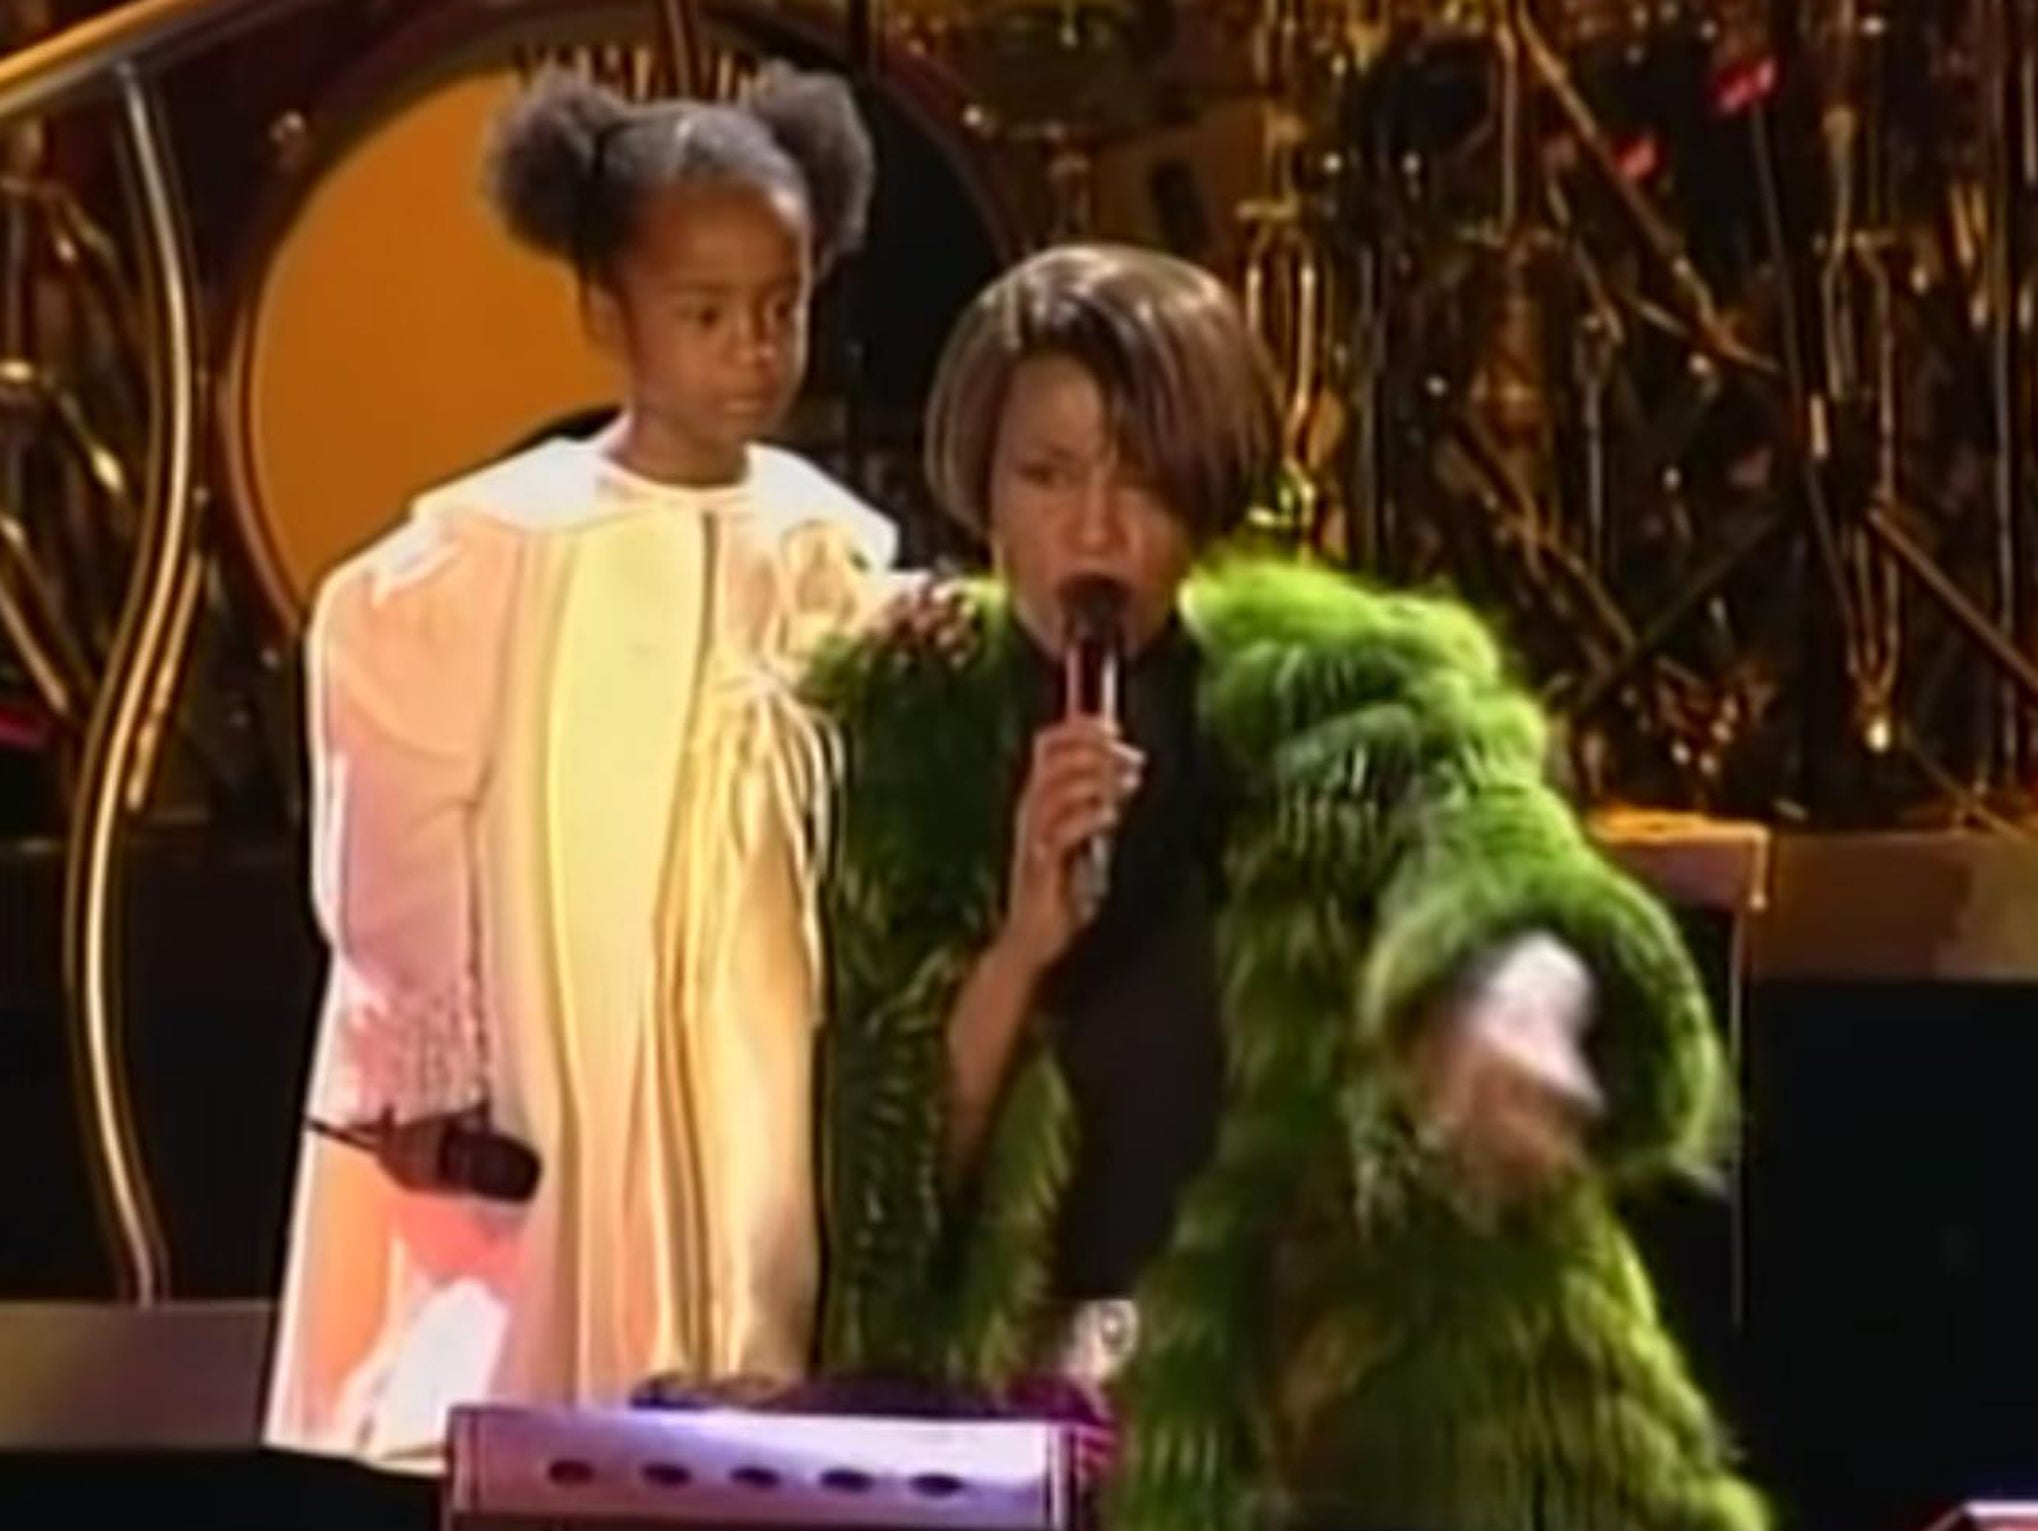 Bobbi Kristina Brown and Whitney Houston perform on stage together in 1999